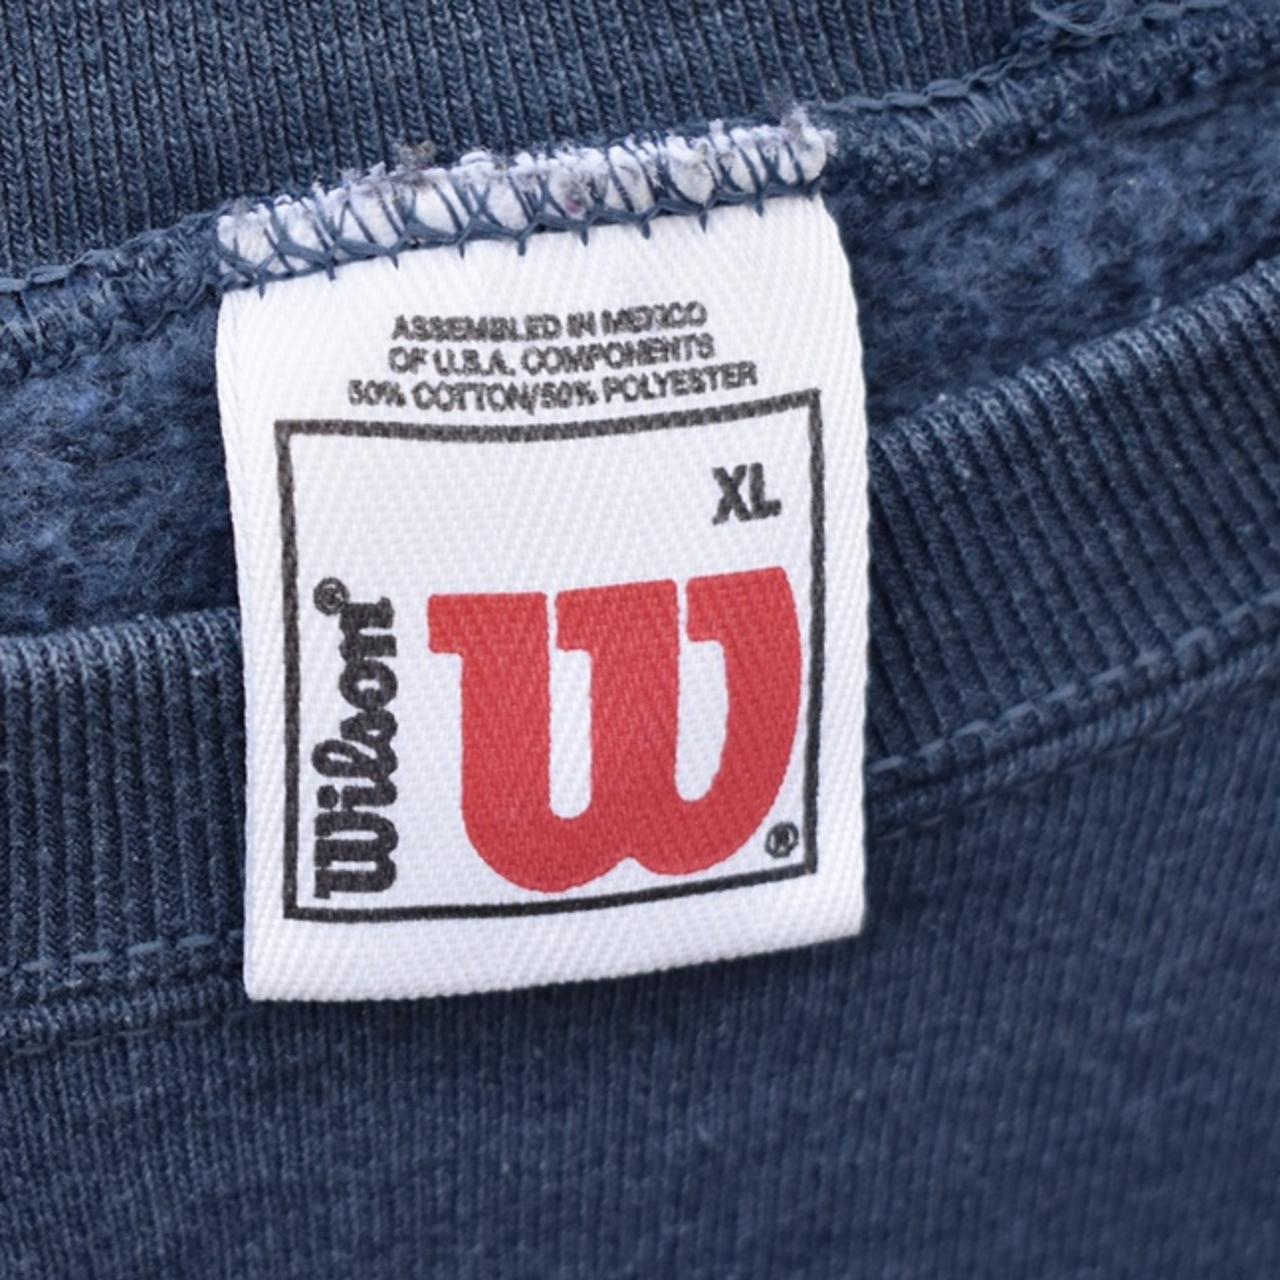 Product Image 2 - Oversized Vintage Wilson Crewneck

Thick and